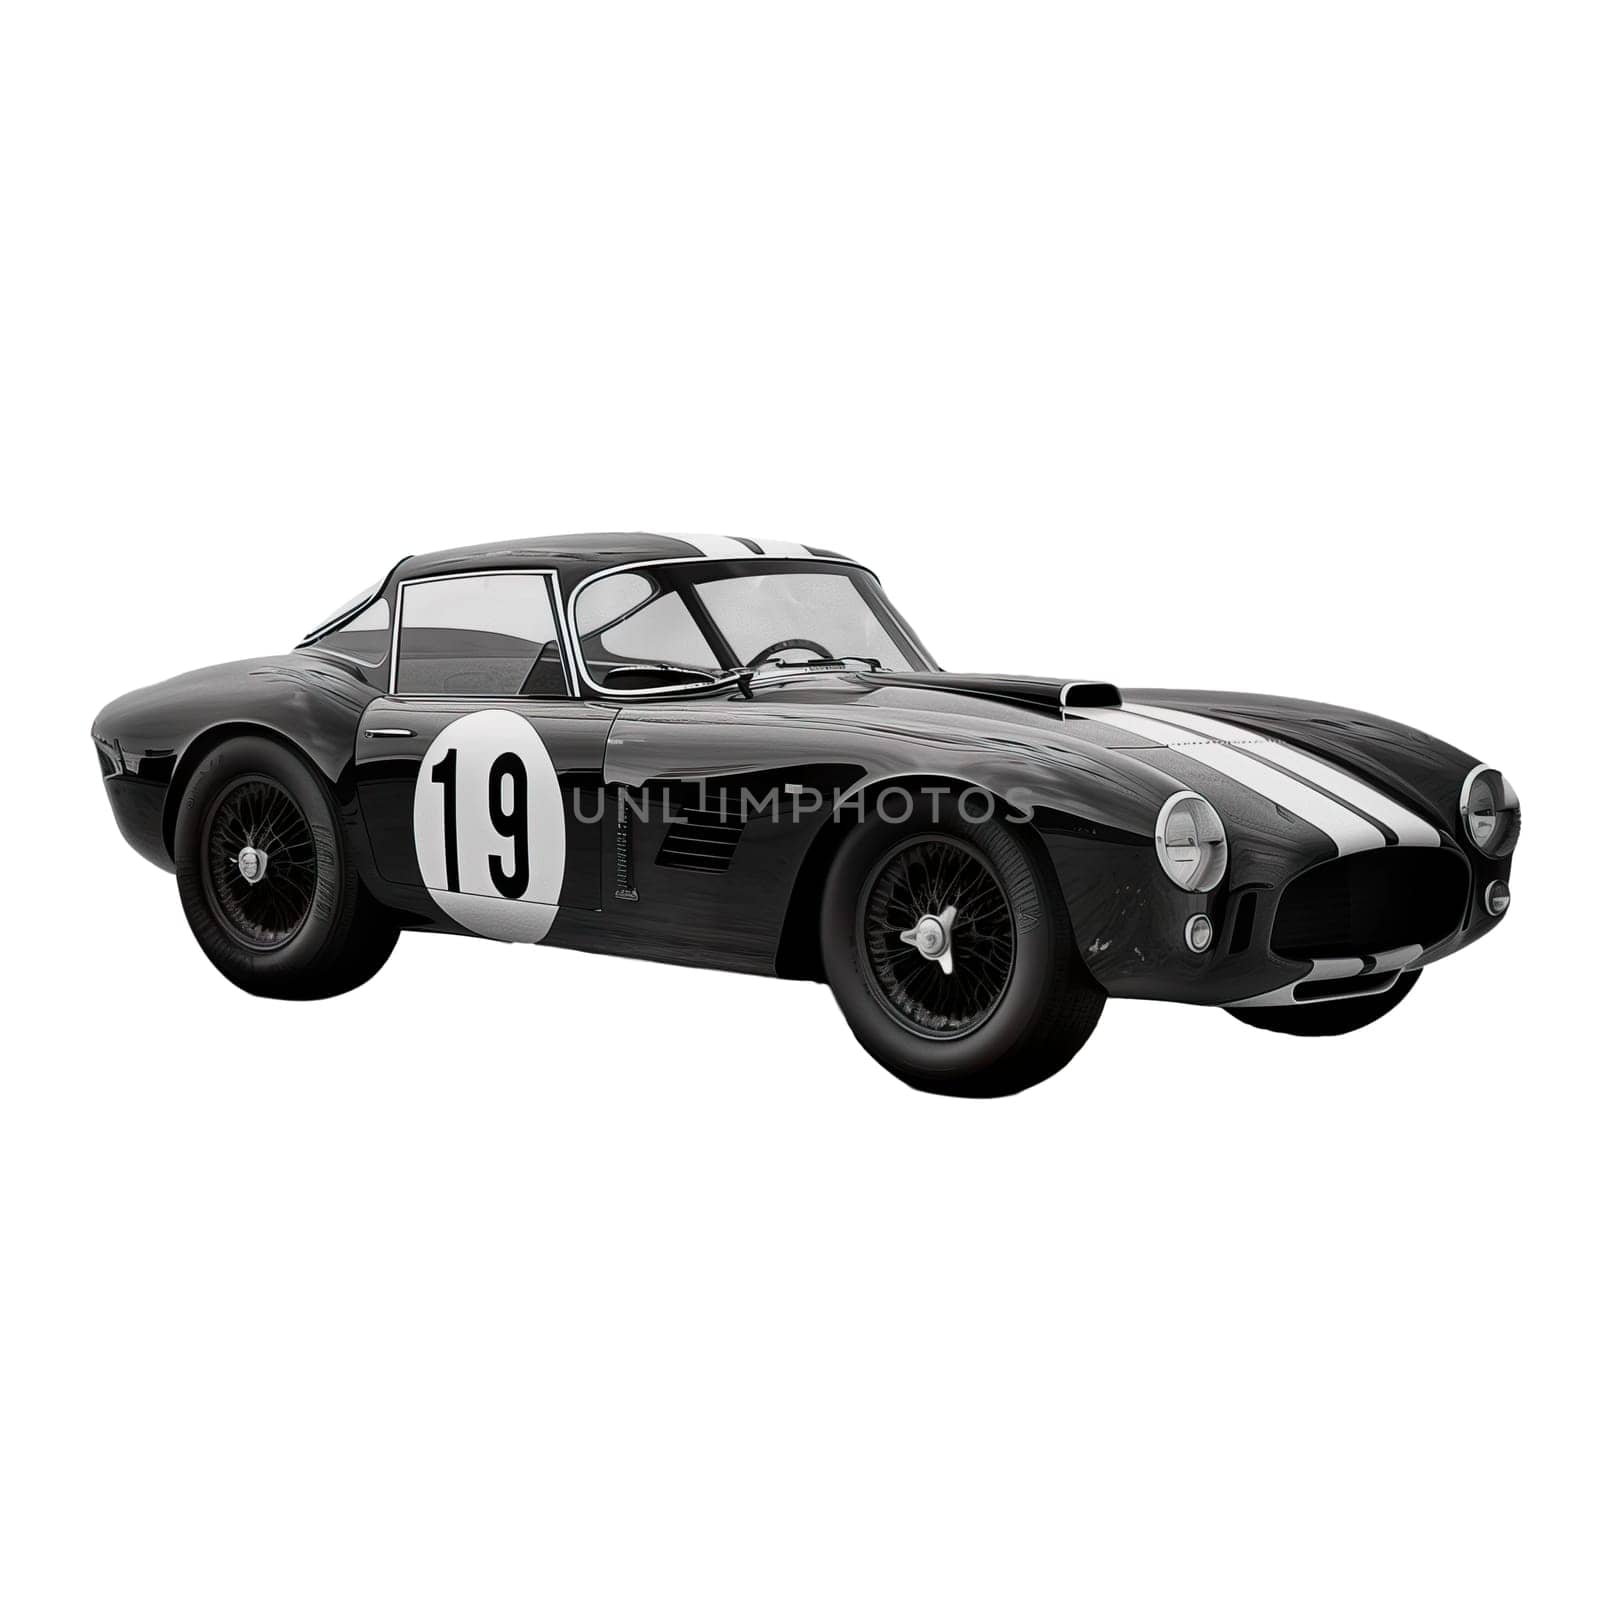 Classic vintage sport car black and white isolated photo by Dustick